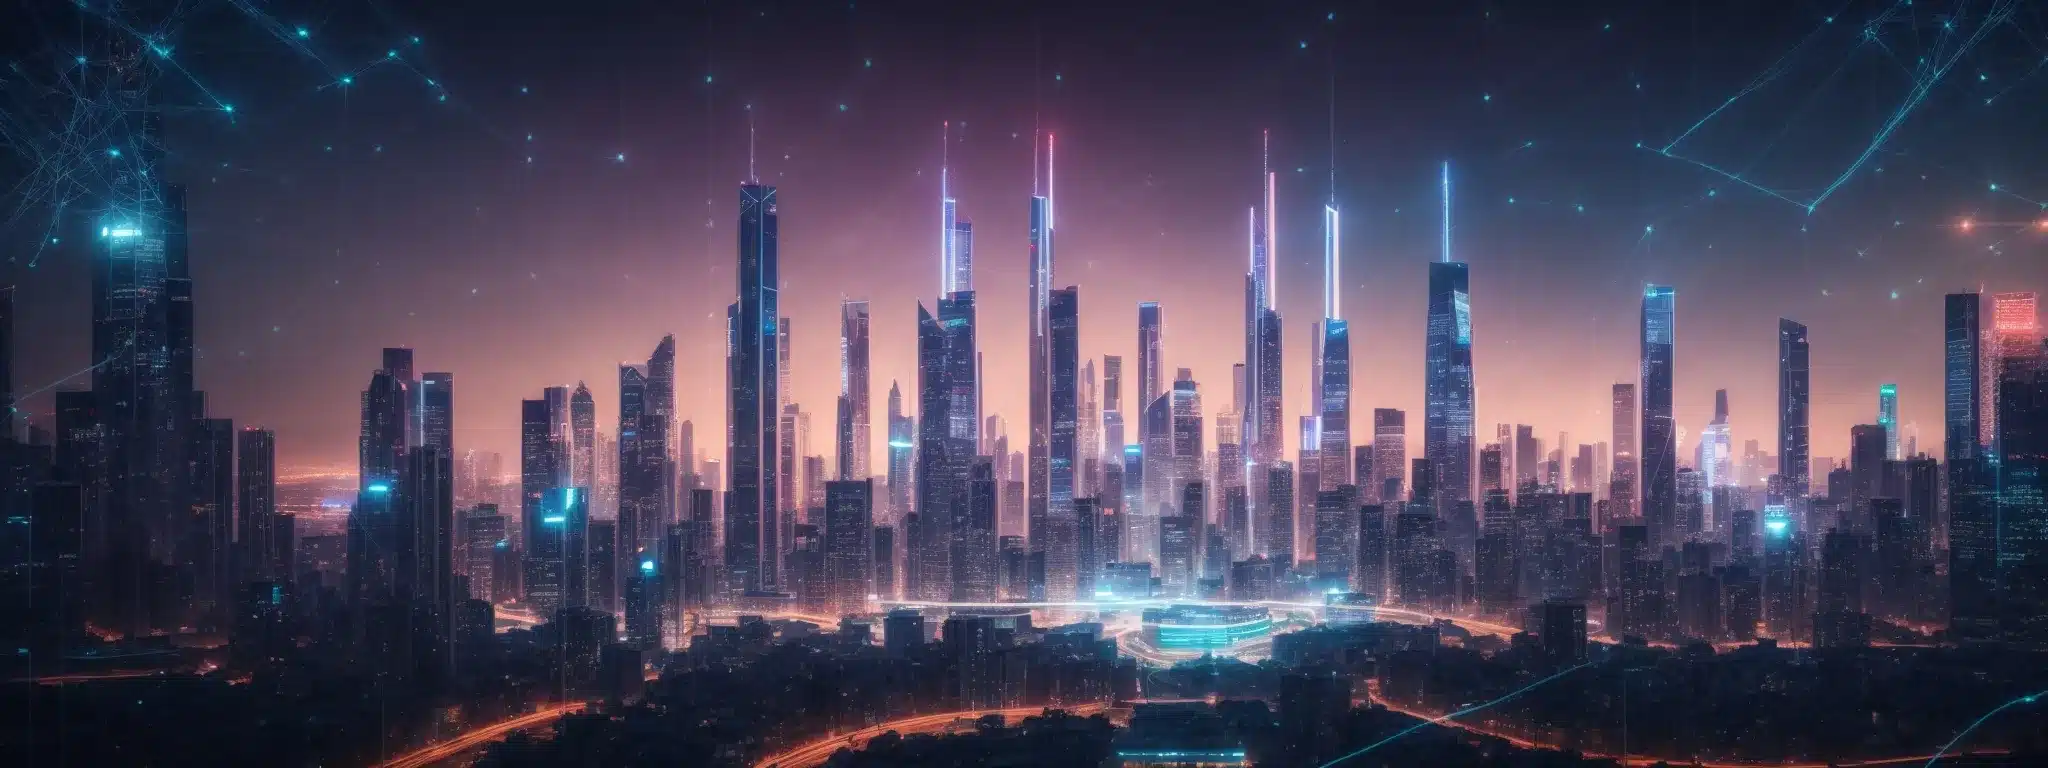 A Futuristic City Skyline Basking Under The Glow Of A Networked Digital Interface Symbolizing Cutting-Edge Seo Practices.